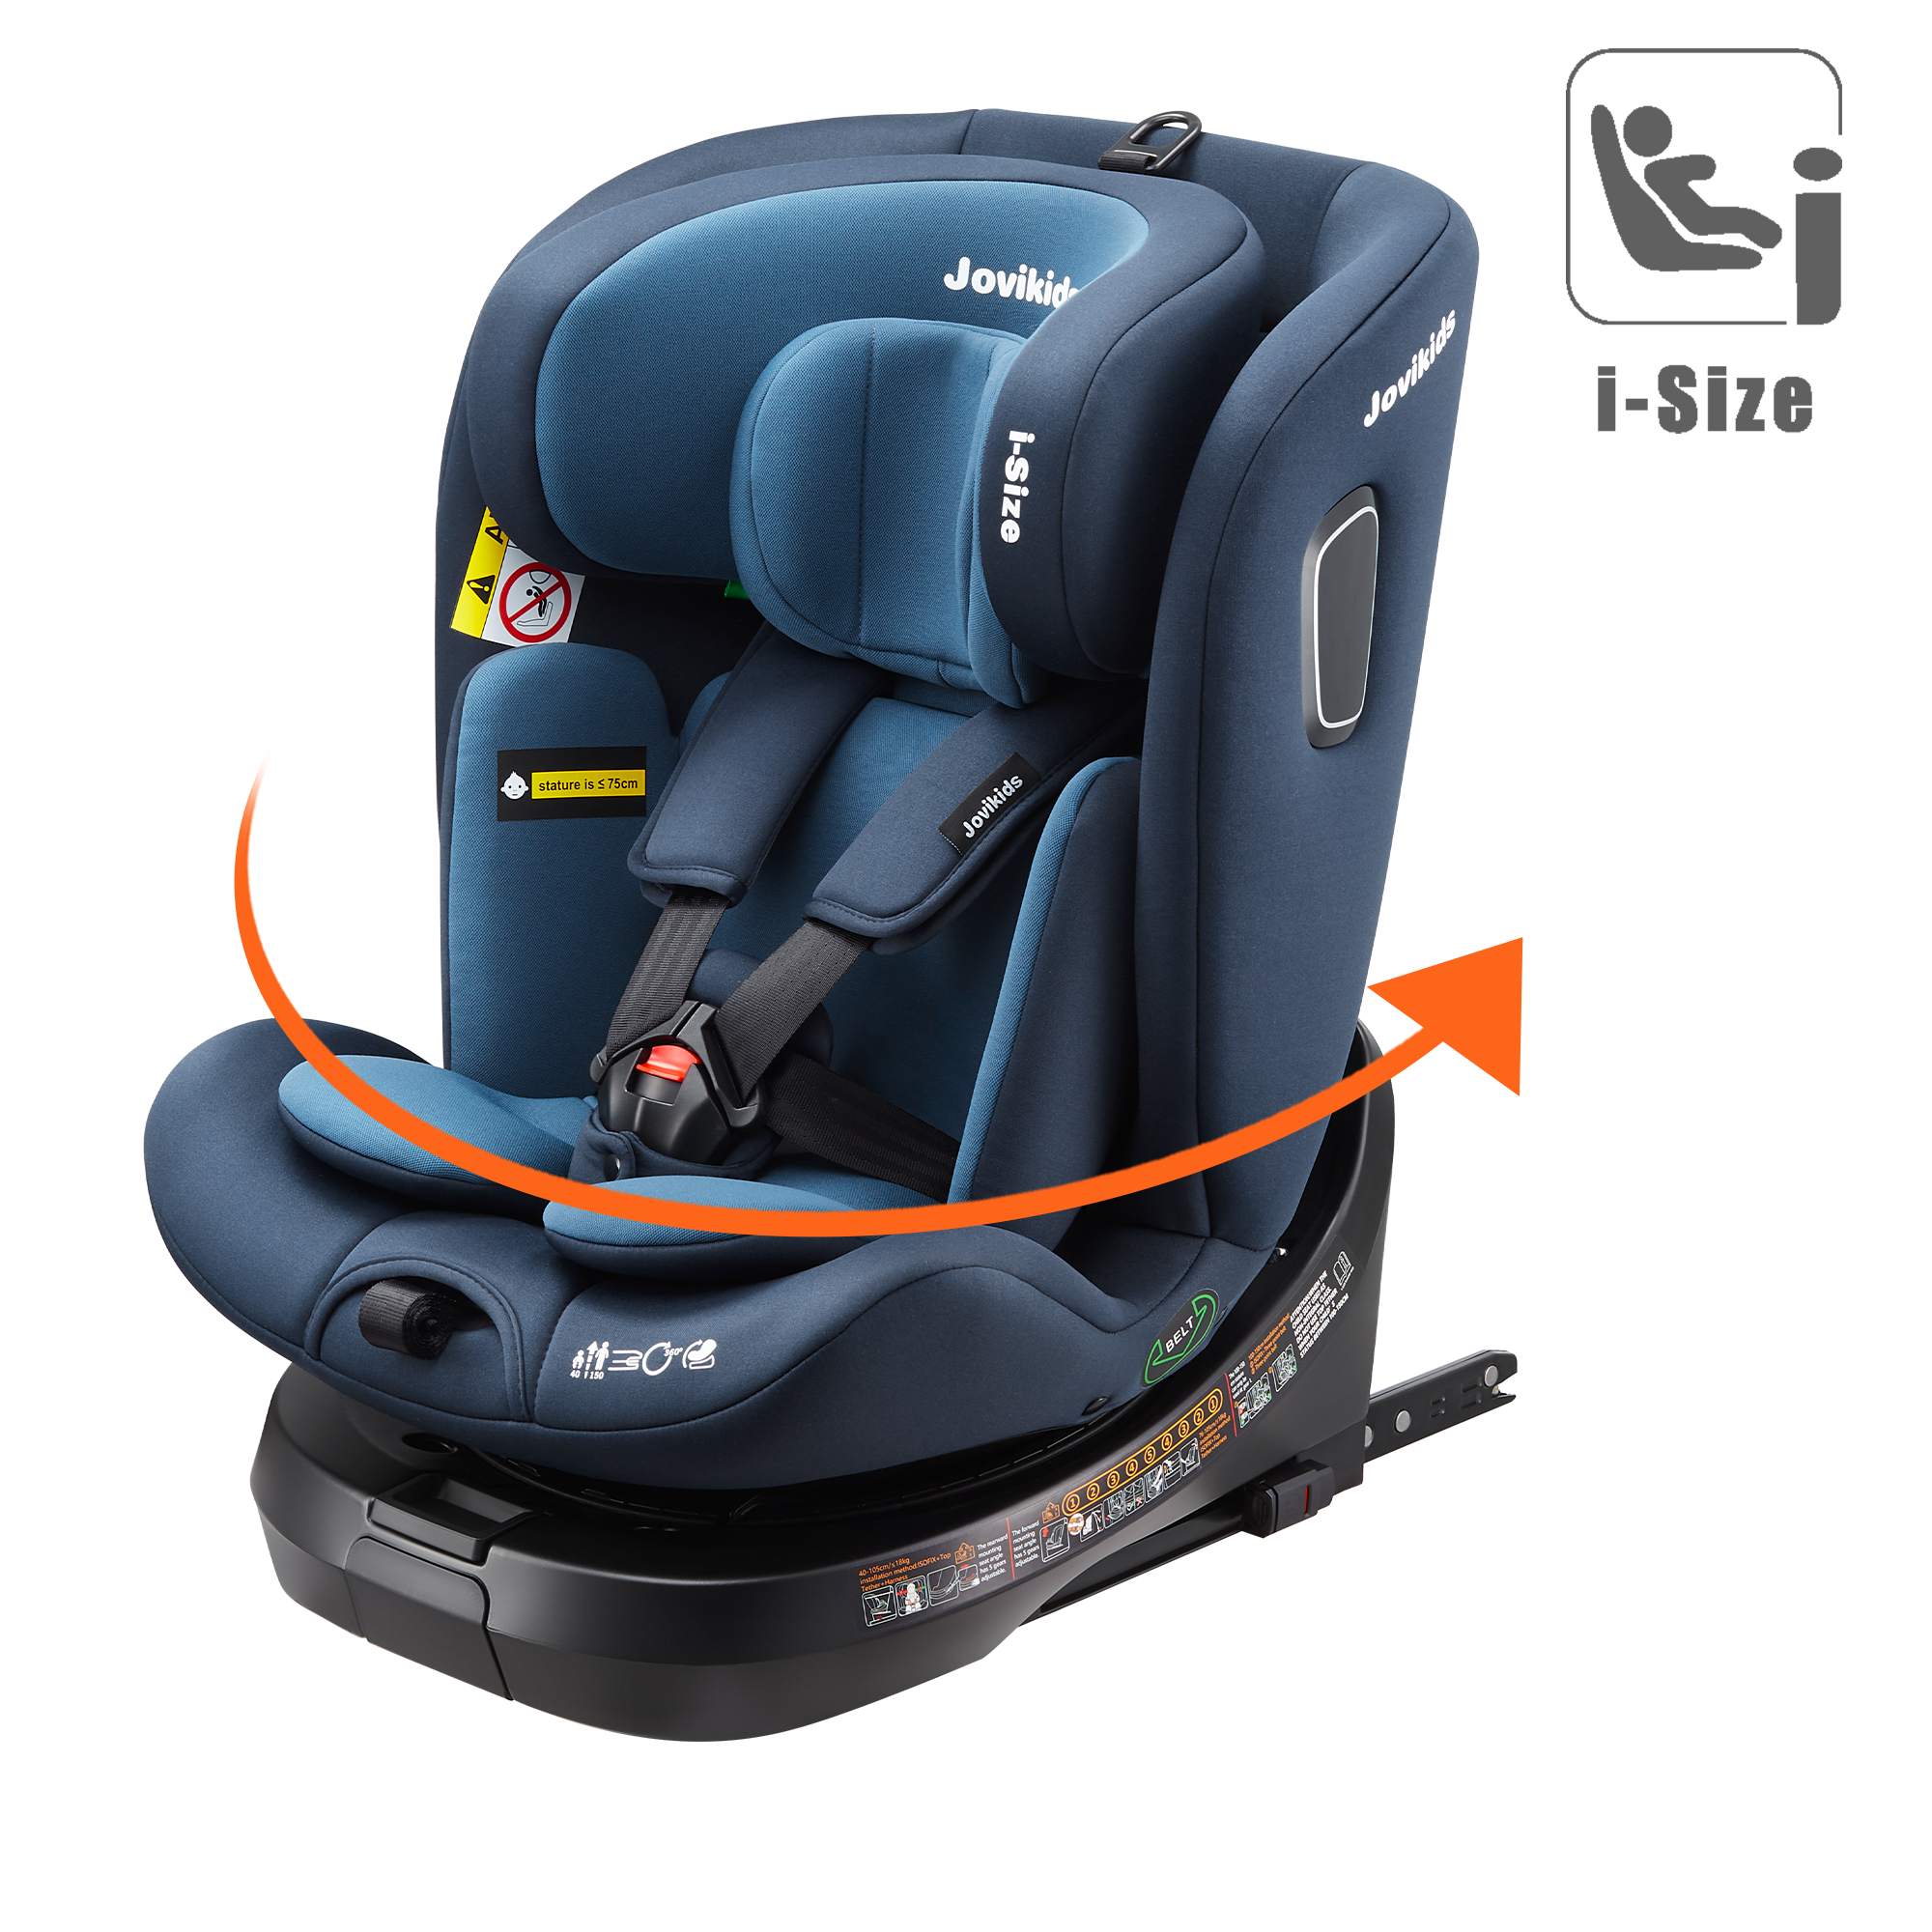 Jovikids ISOFIX Car Seat 360° for 40-150cm Baby Childs